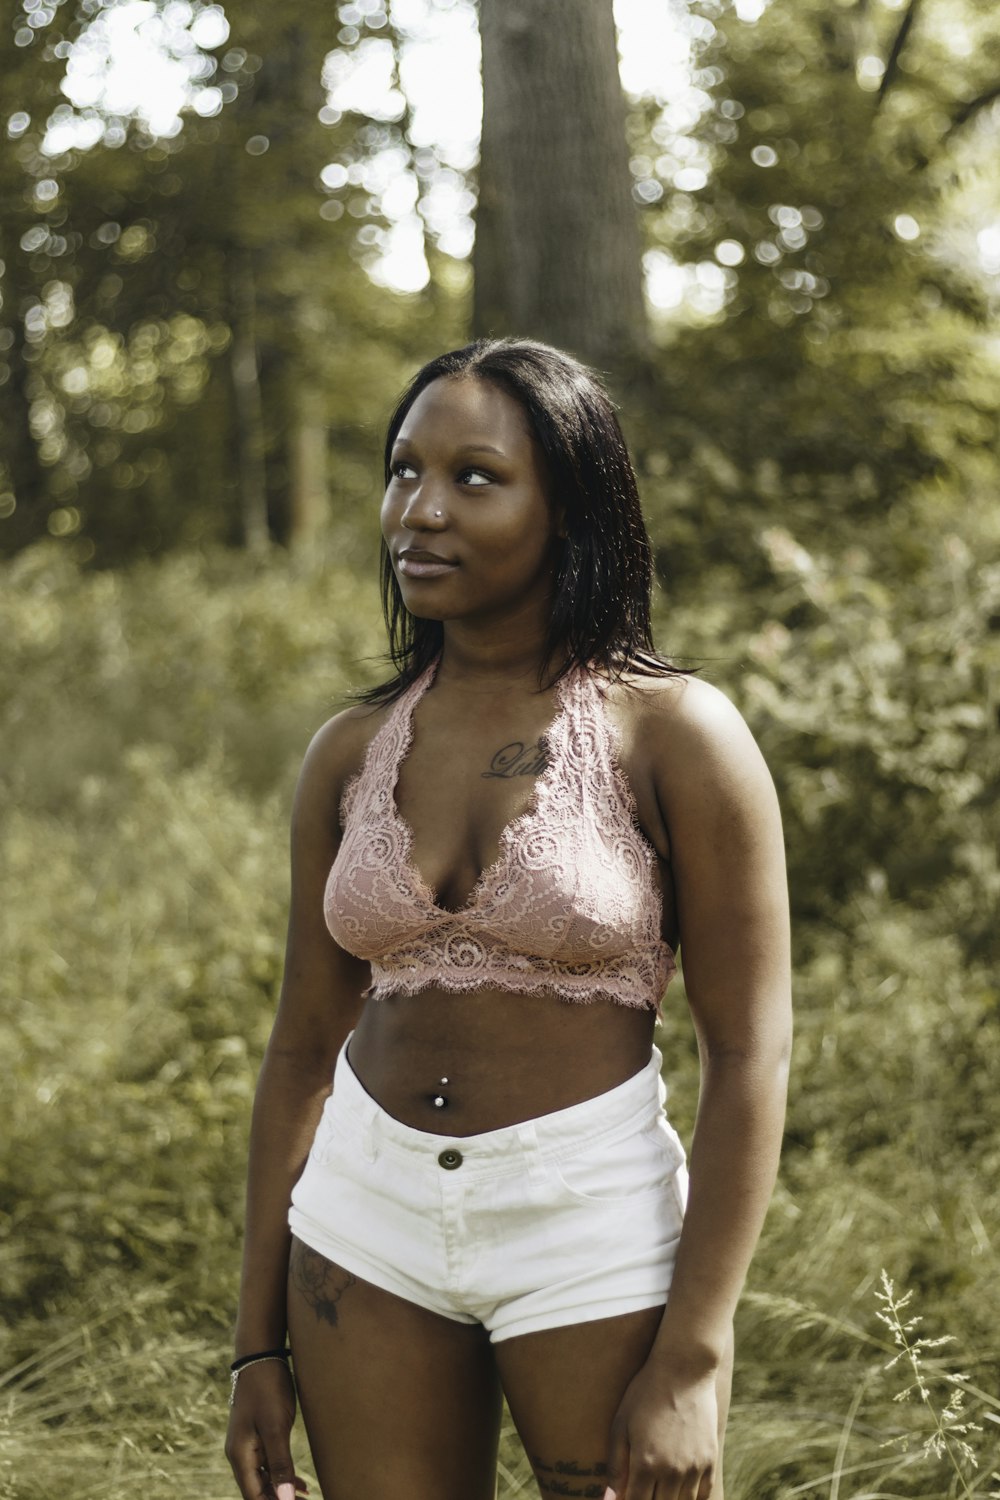 Woman wearing pink lace crop top and white shorts photo – Free #wonder  #portrait #nature #spring #photography Image on Unsplash